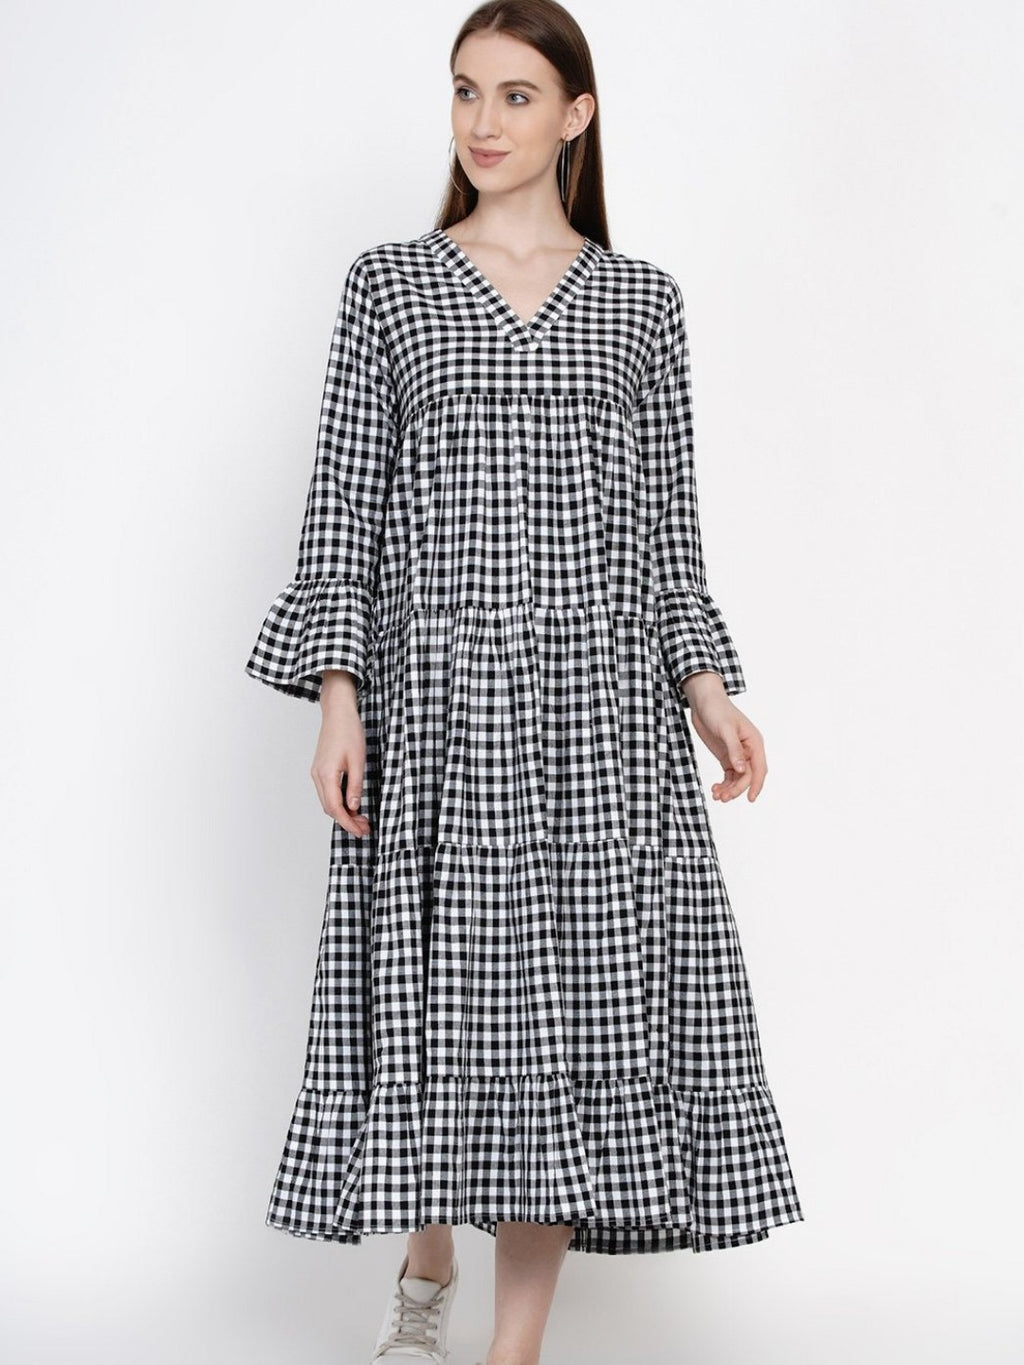 Handloom cotton tiered black and white gingham check dress-Dresses-Fabnest